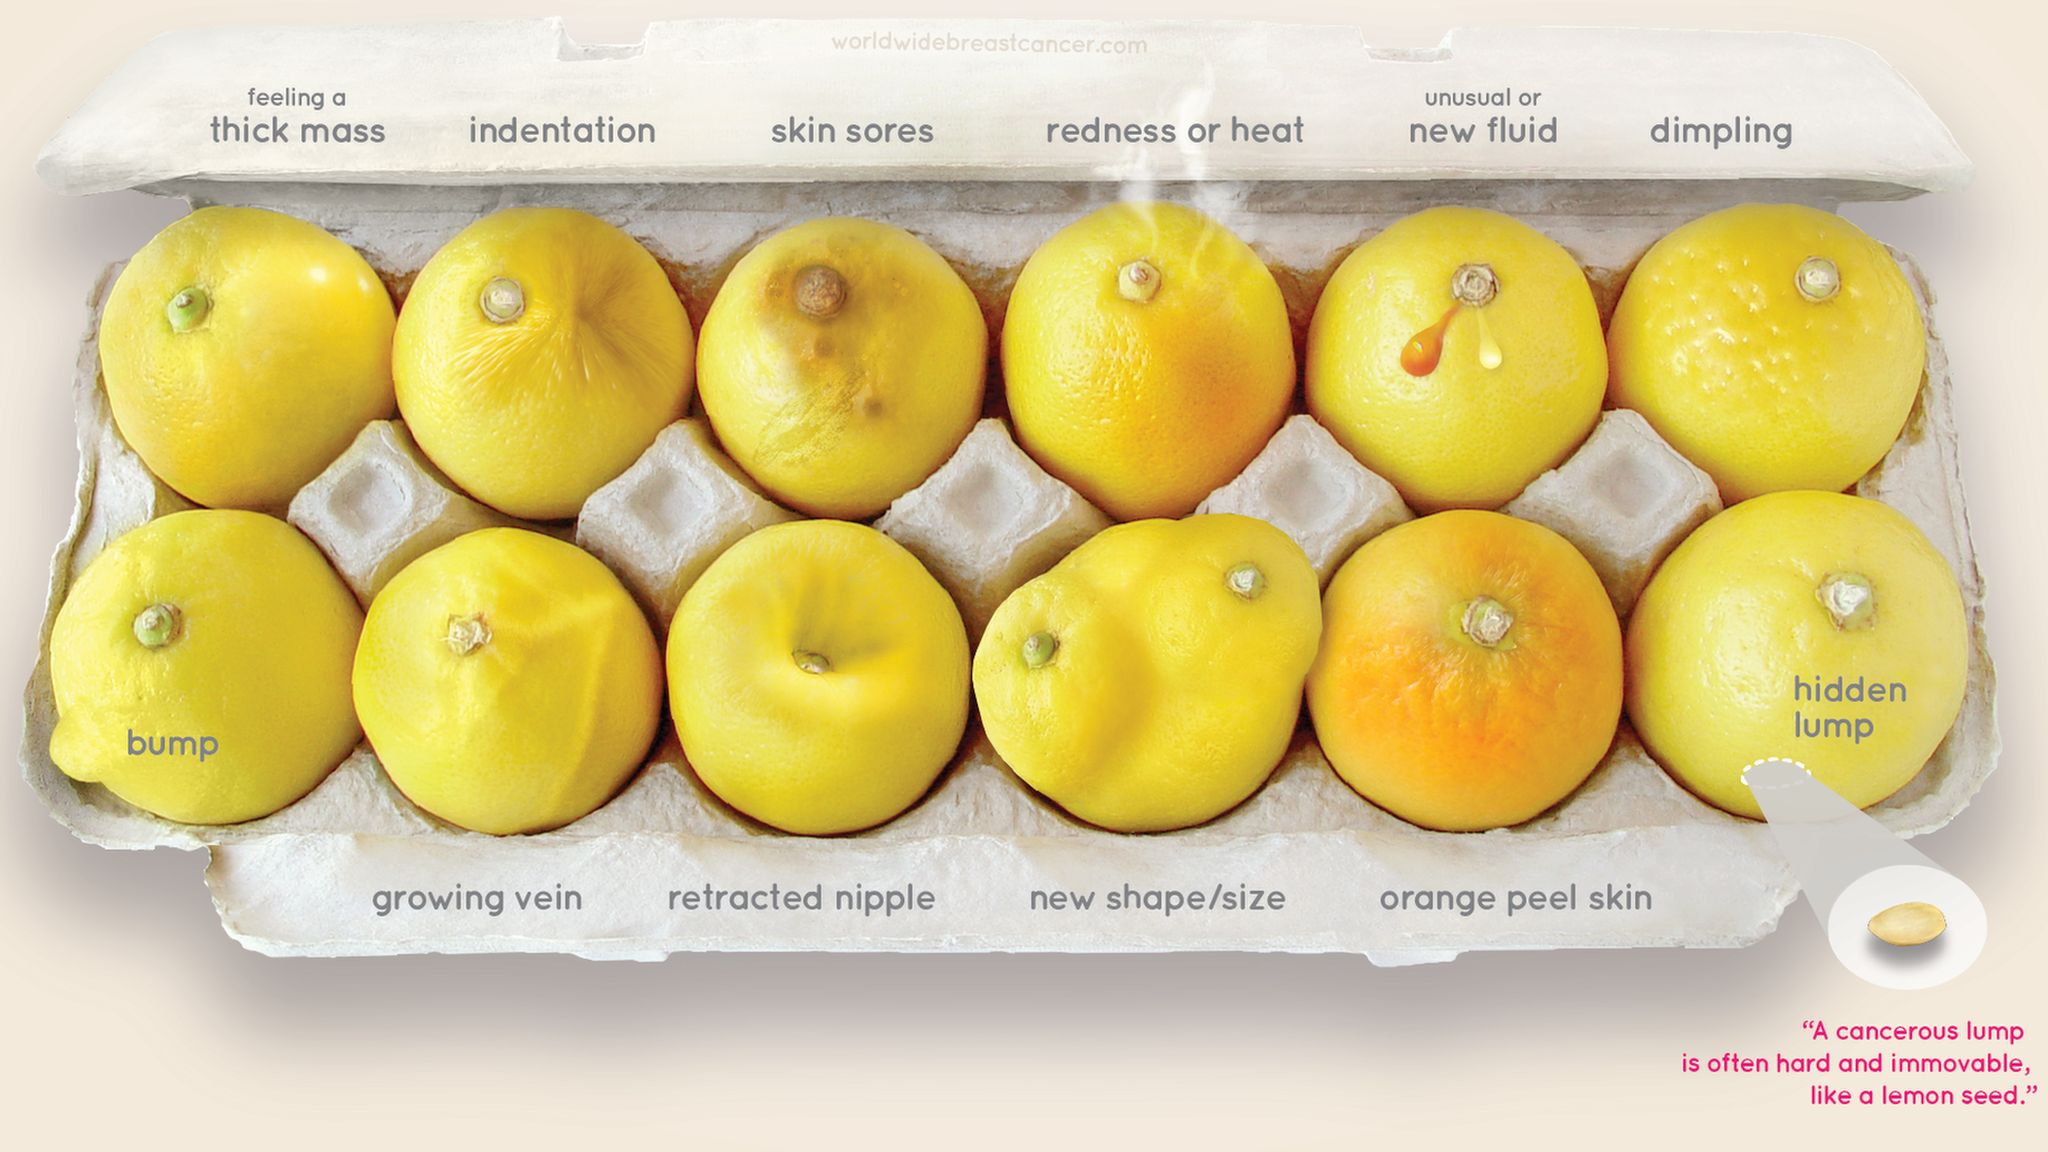 The signs of breast cancer, as shown on lemons